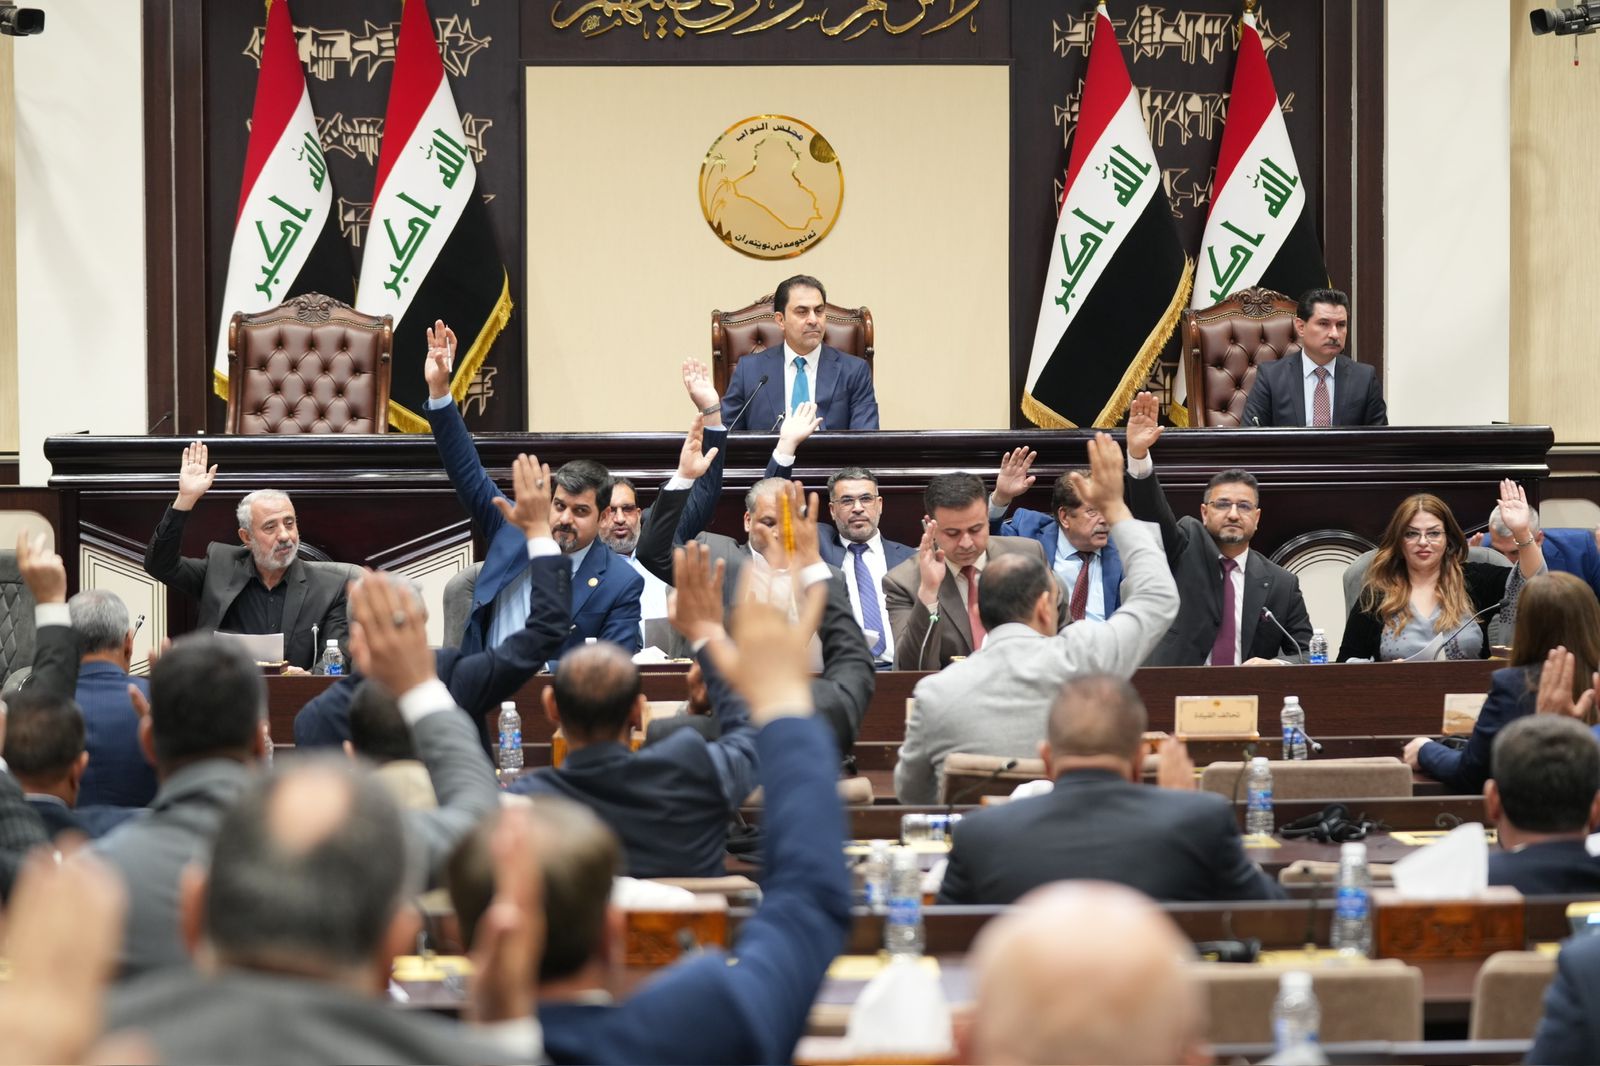 Iraqi Parliament votes on law targeting homosexuality